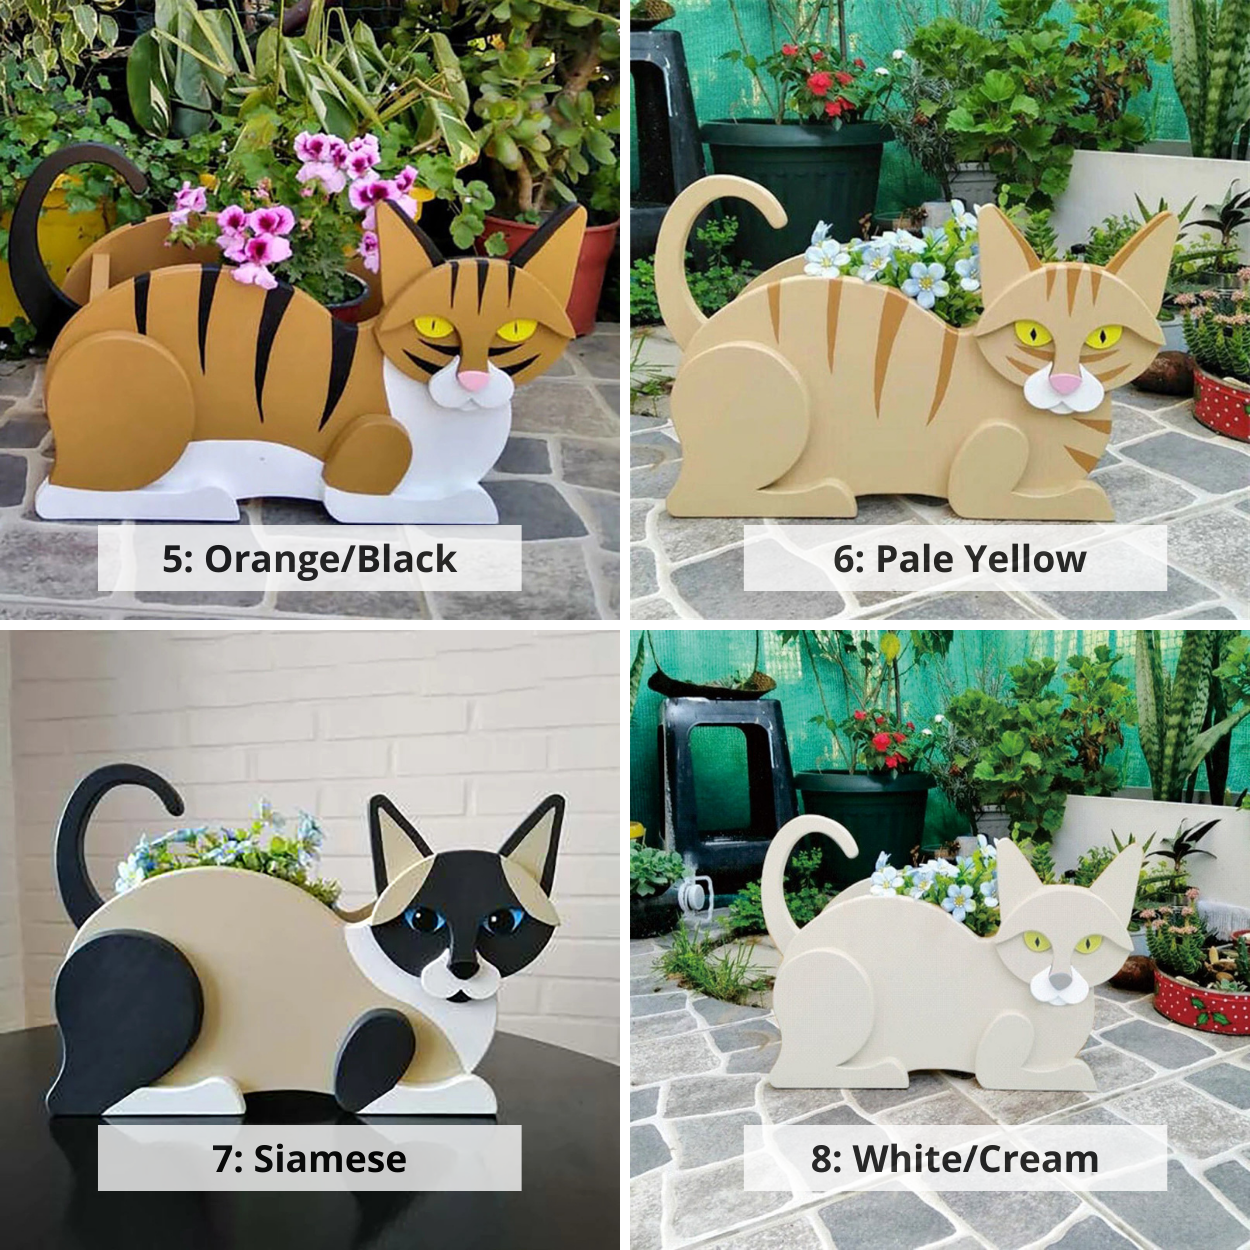 Cat Planters for garden and home decor